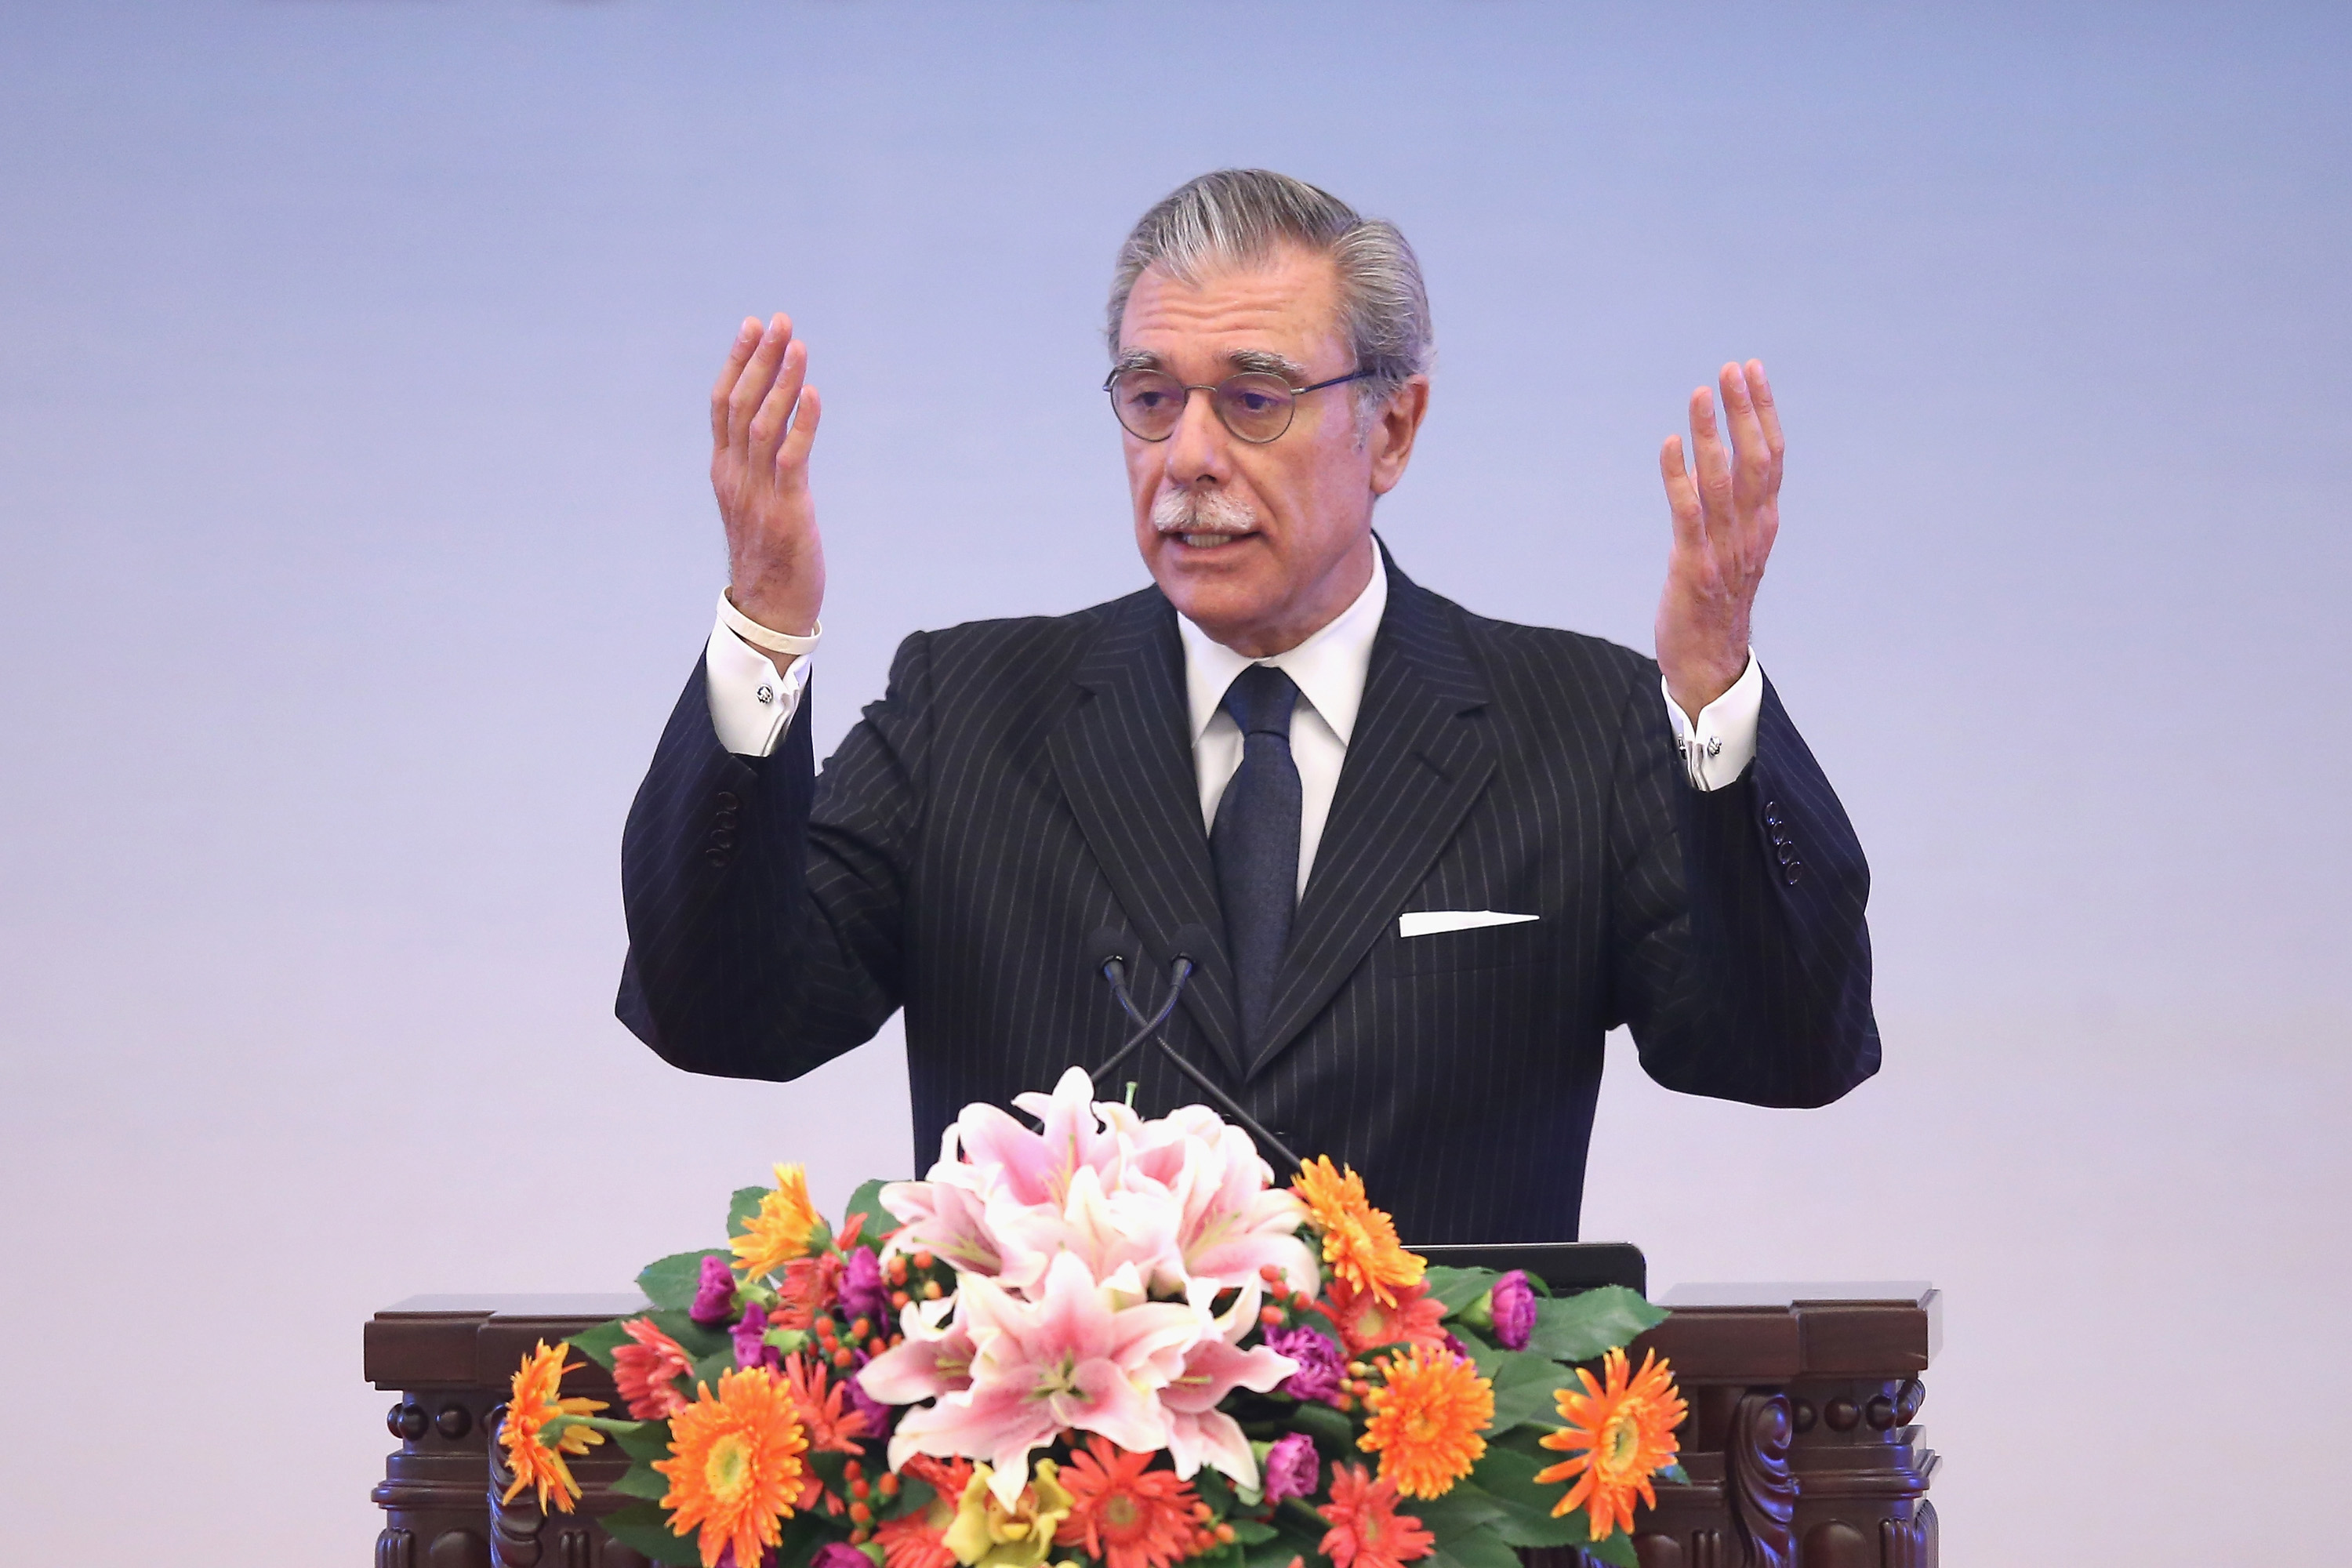 Former U.S. Secretary of Commerce Carlos Gutierrez gives a speech during the opening session of the 1st China Conference of Quality at The Great Hall Of The People on Sept. 15, 2014 in Beijing. (Feng Li—Getty Images)